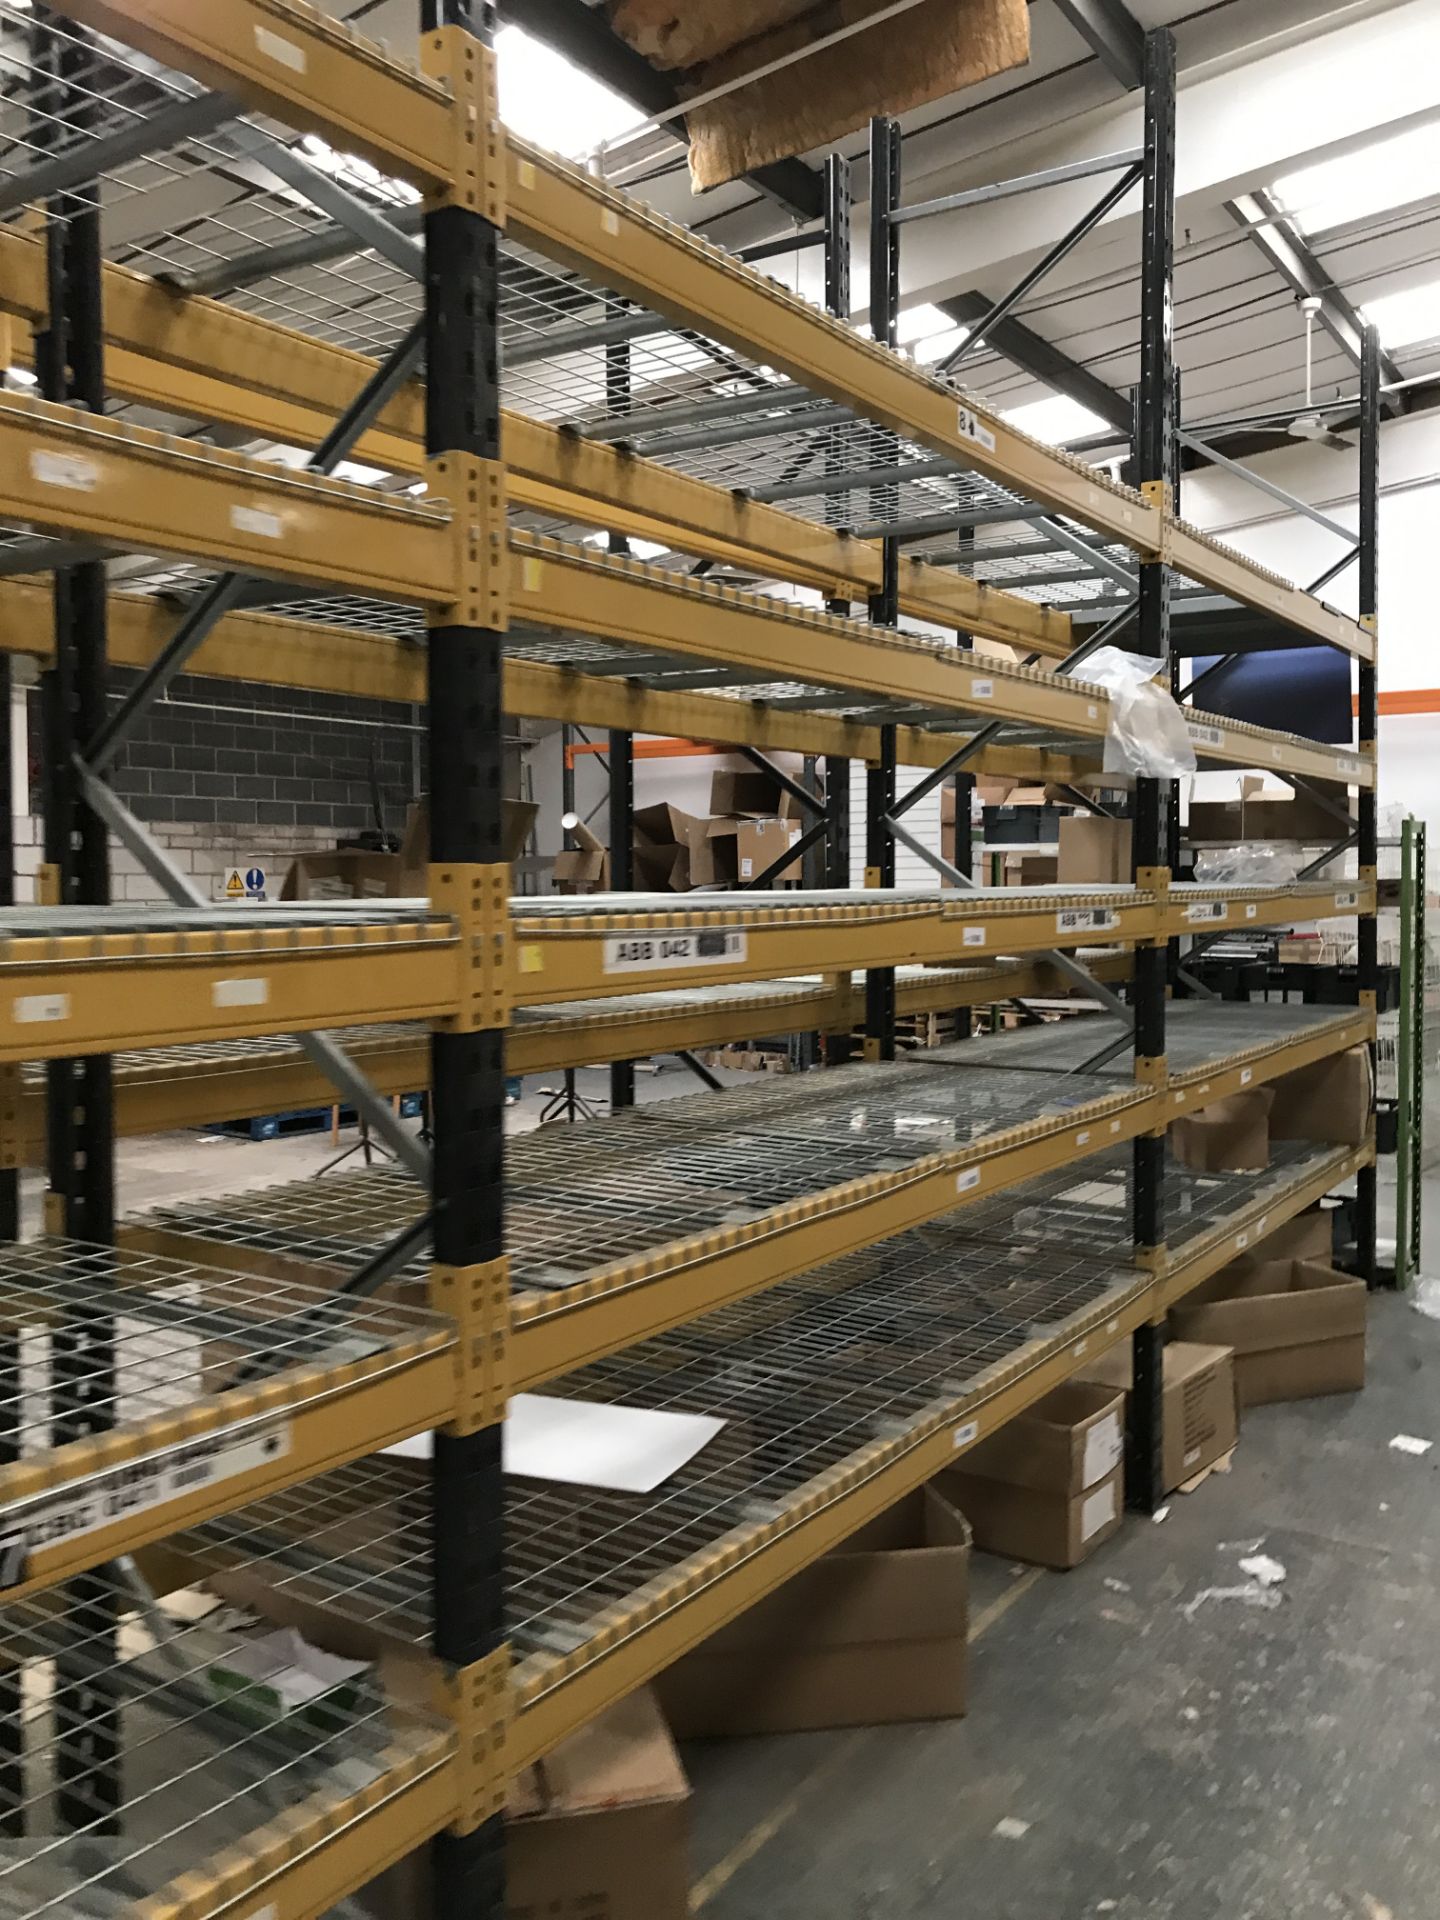 Link 51 11-Bay Mainly Six-Tier Boltless Pallet Racking, each bay approx. 2.8m long x 4m high x 900mm - Image 13 of 15